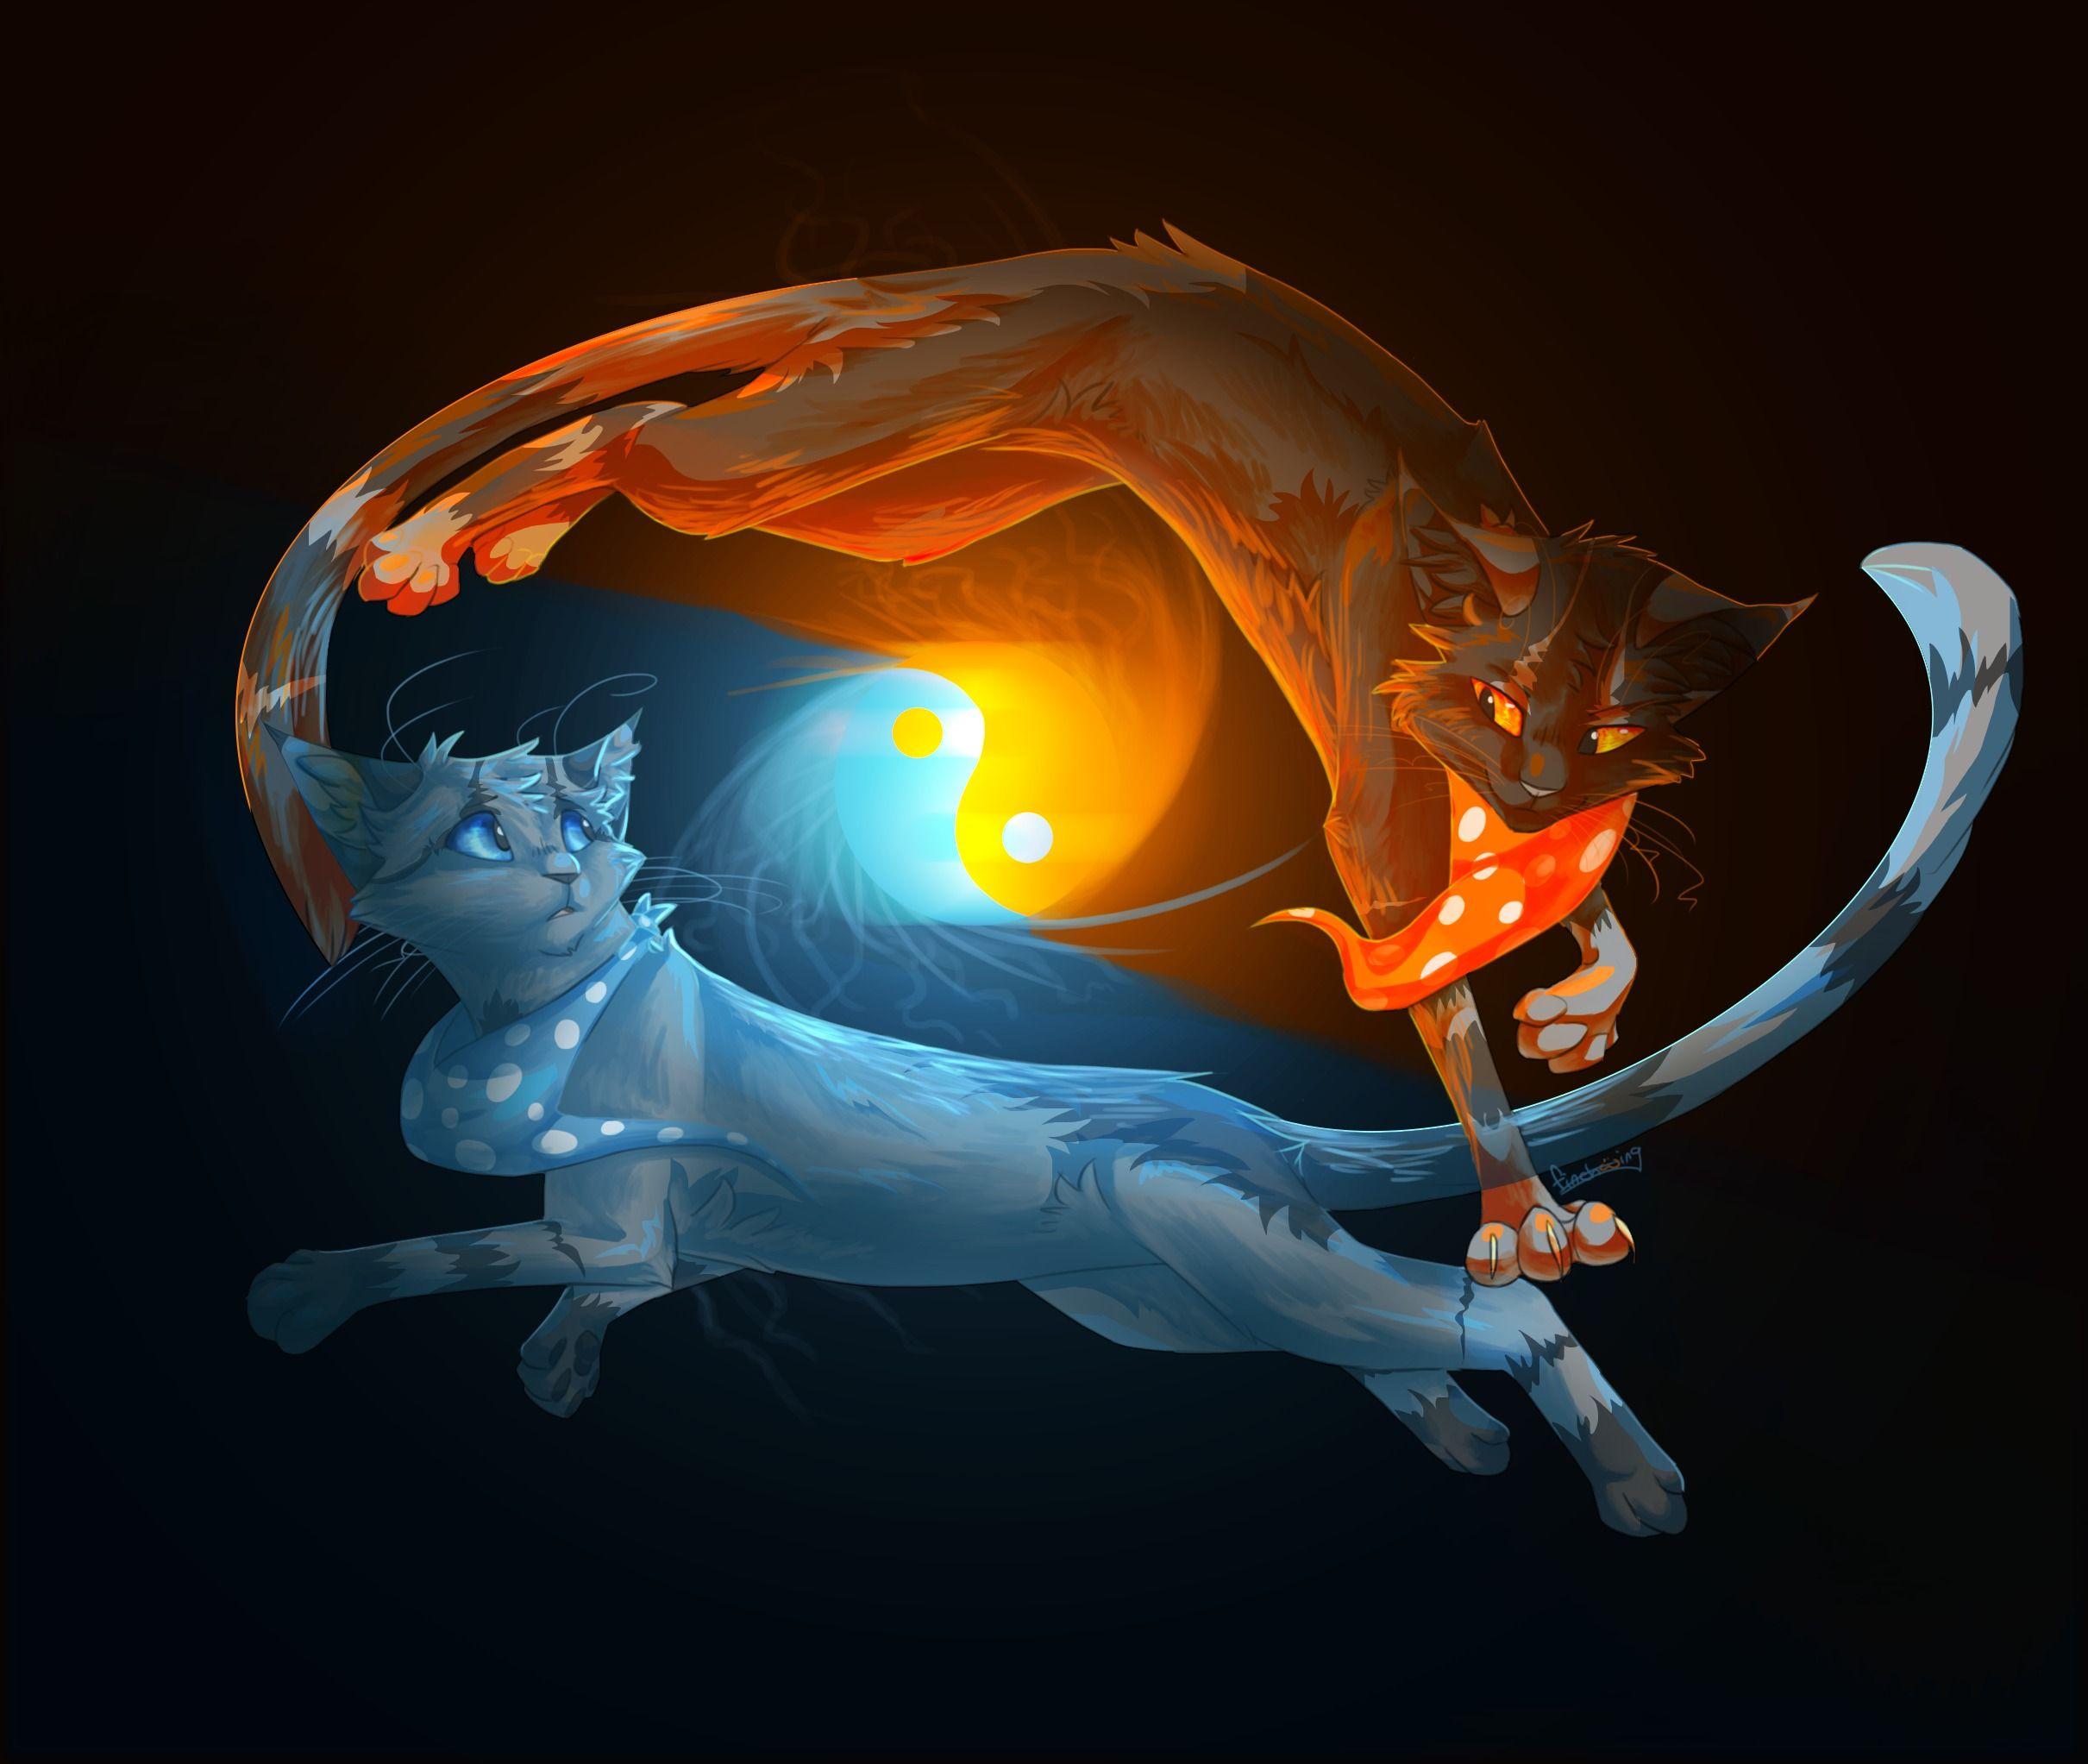 Fire Cats. Animals, Cats, Yin Yang, Fire, Water, Black Background